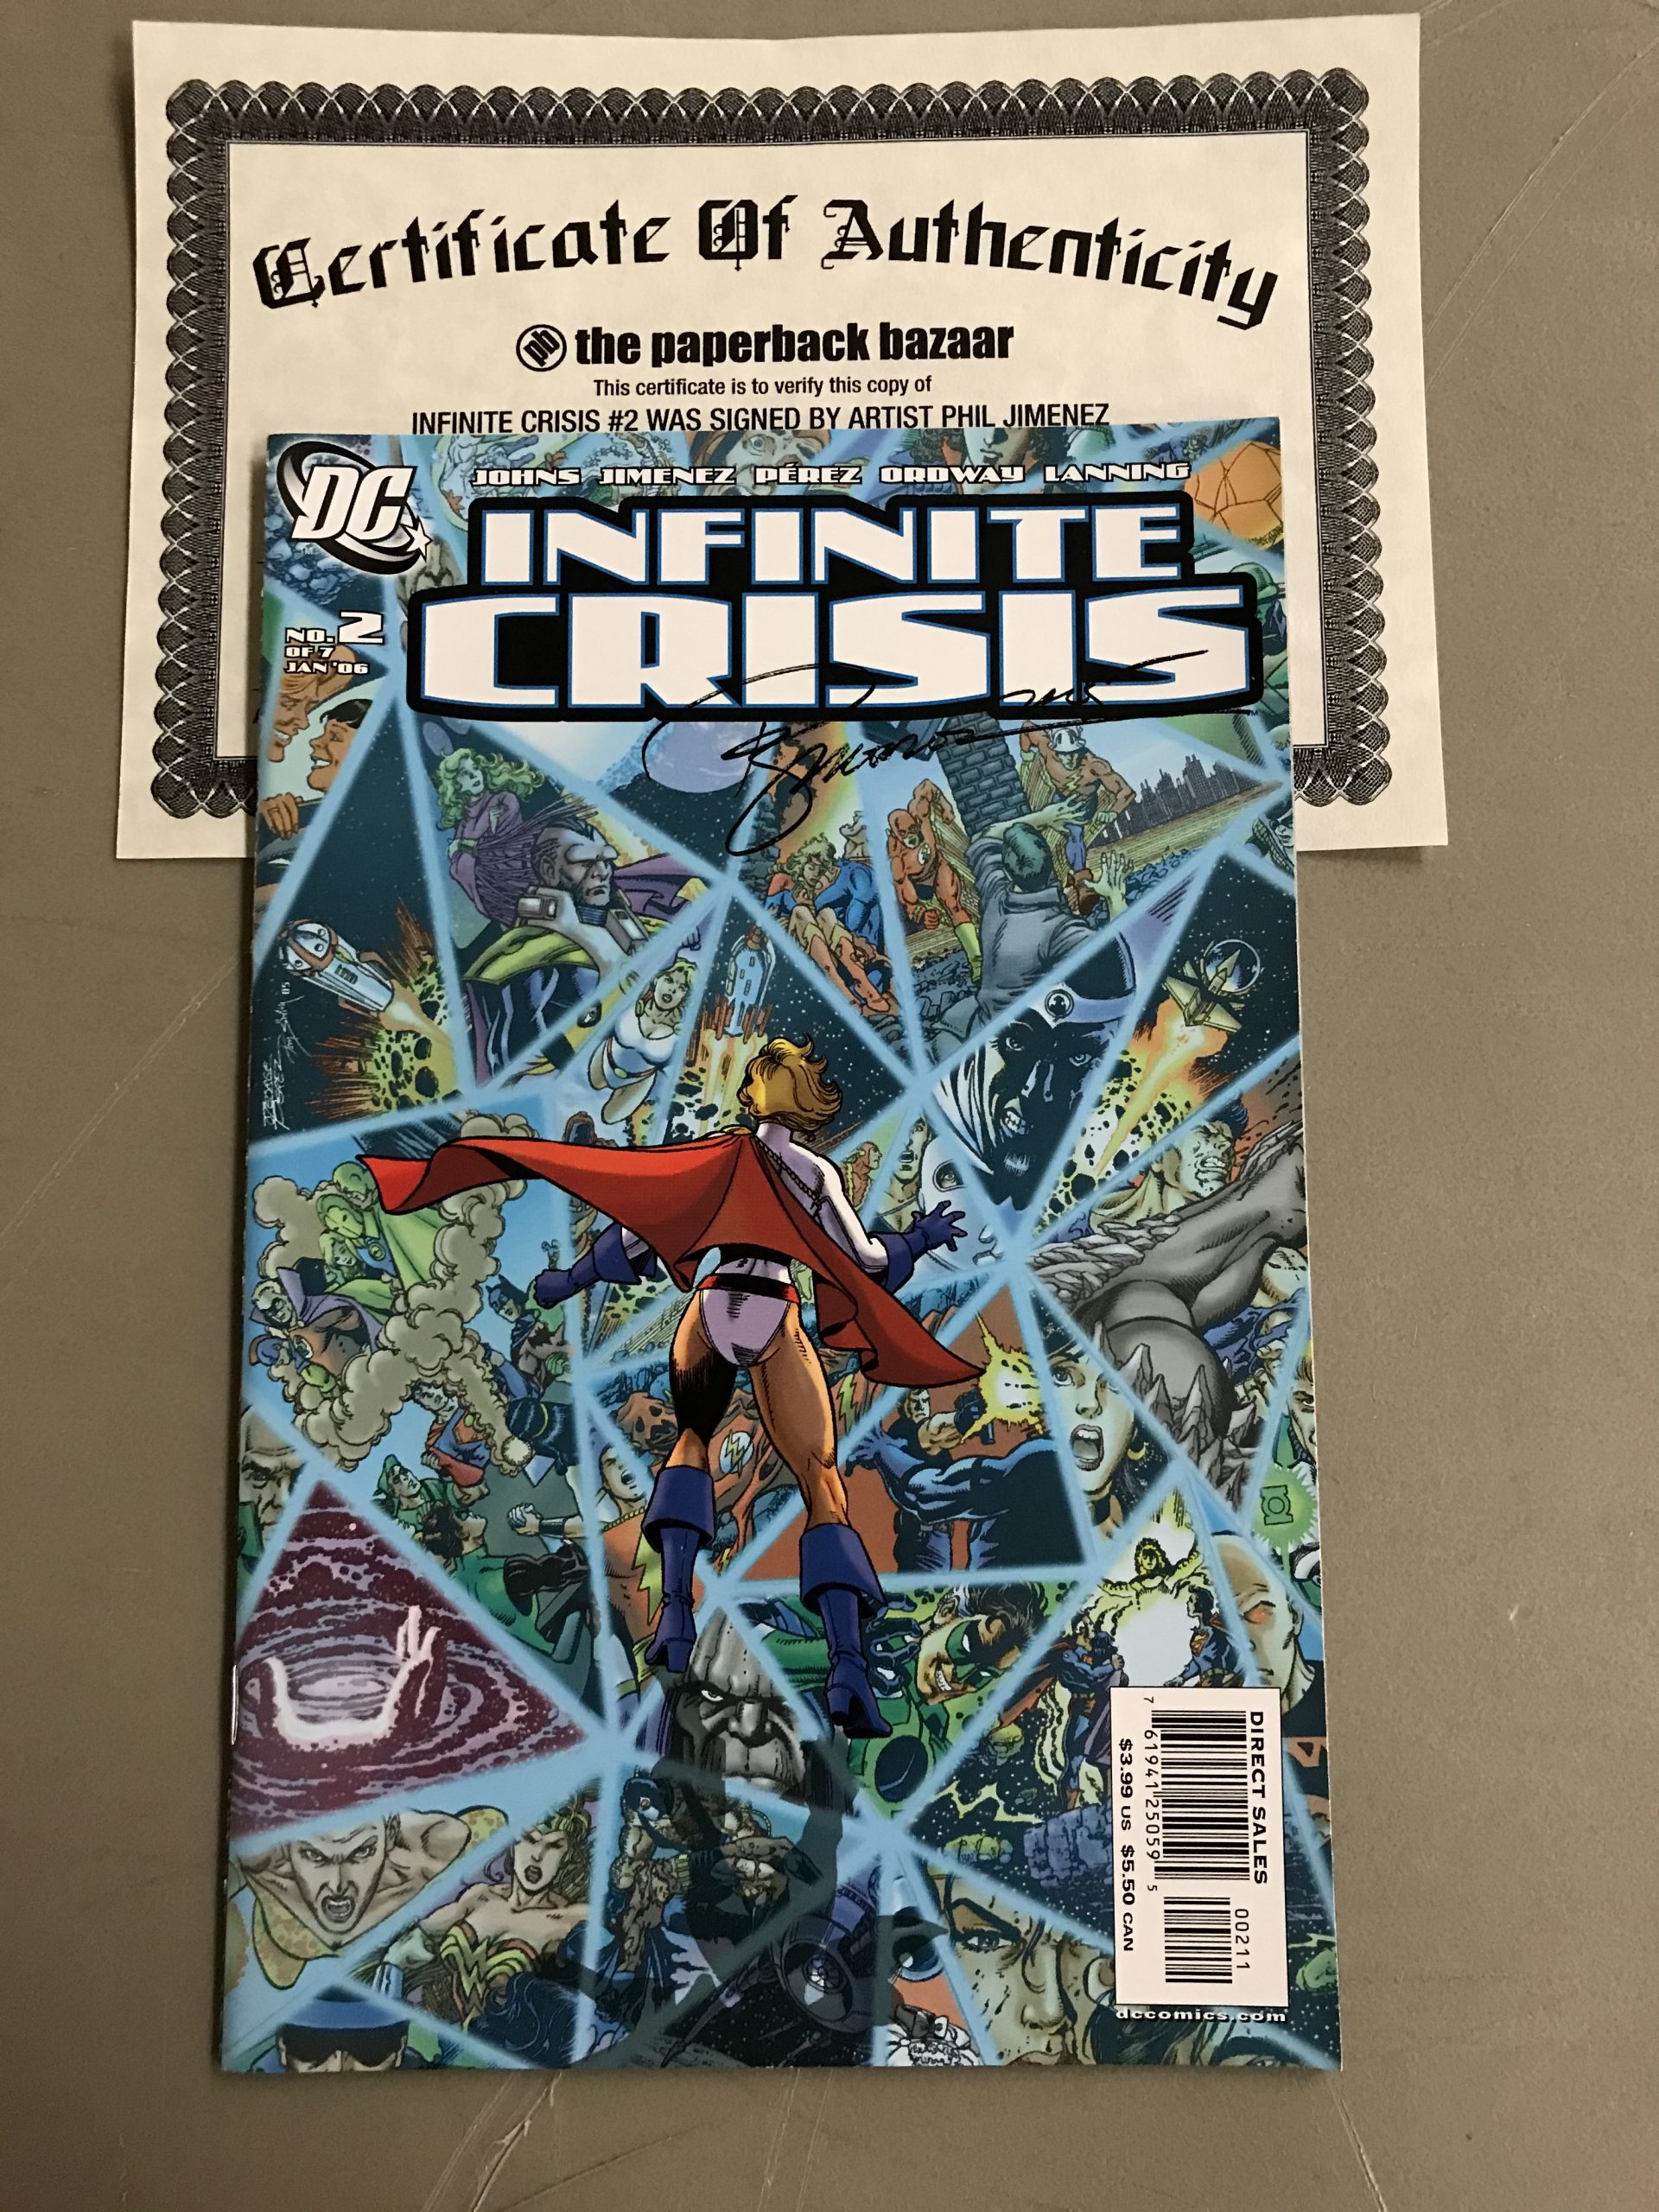 Infinite Crisis #2 Perez Variant Signed by Phil Jimenez (With Certificate of Authenticity)